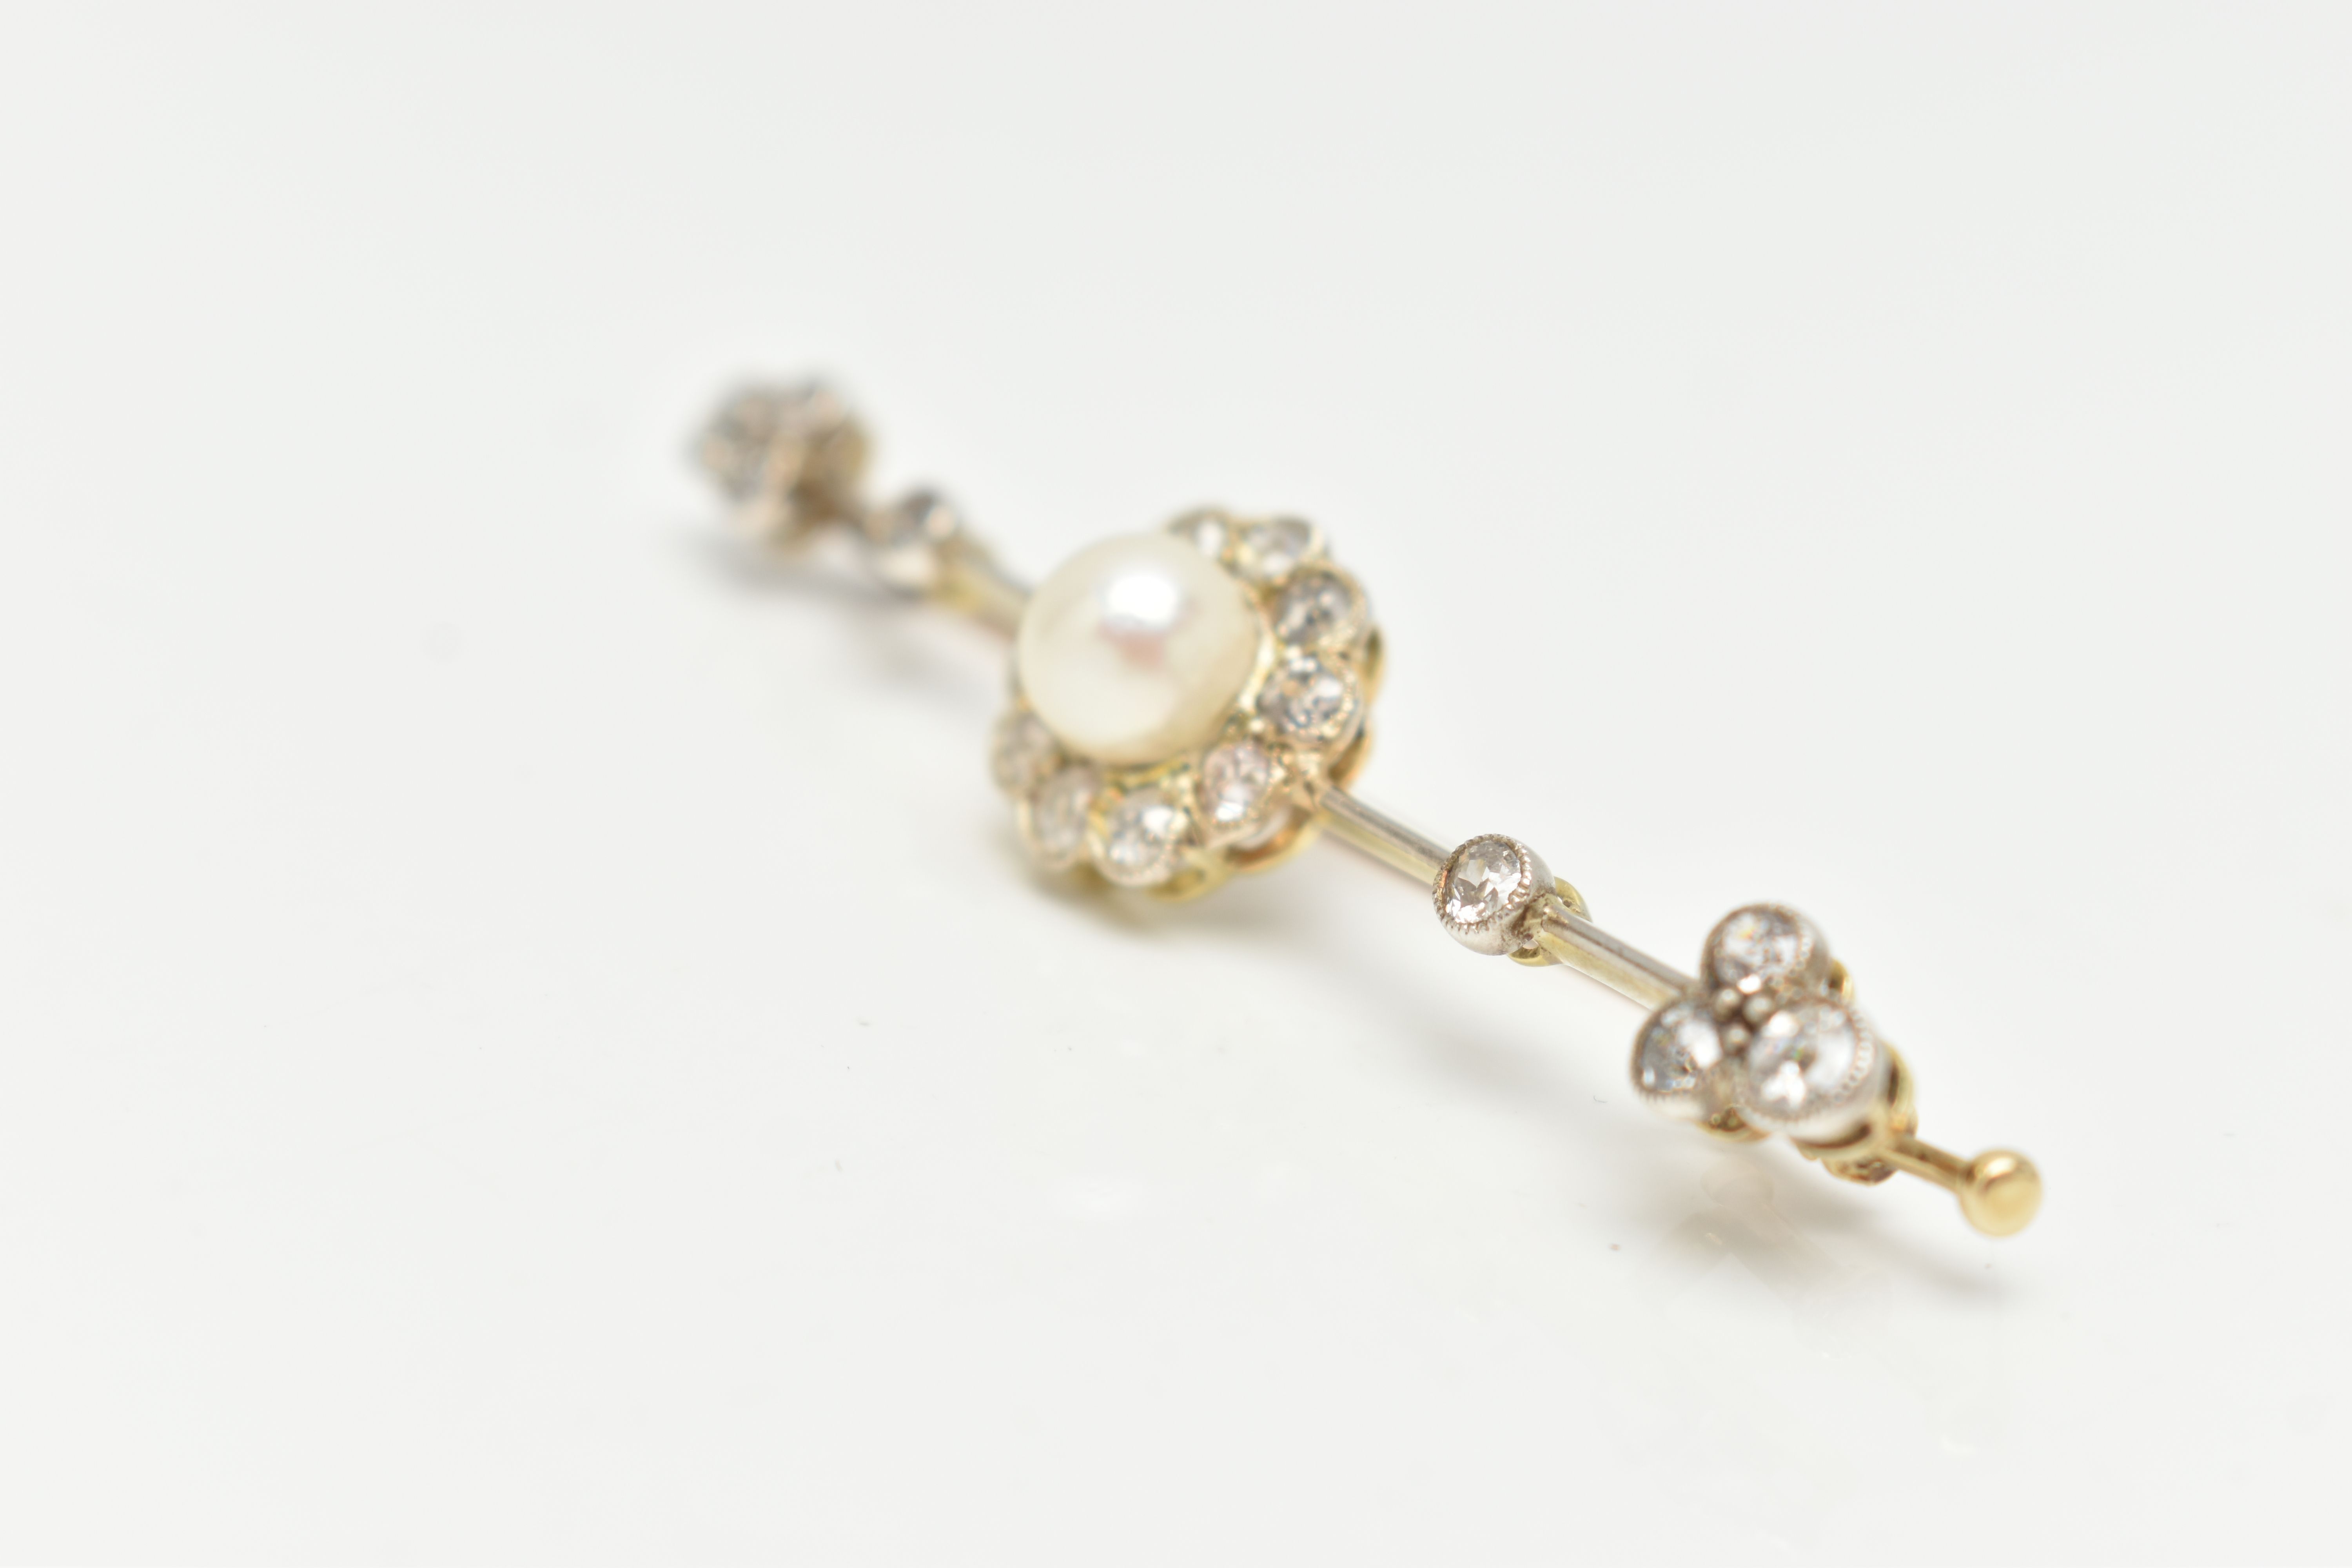 AN EARLY 20TH CENTURY, YELLOW AND WHITE METAL DIAMOND AND PEARL BAR BROOCH, centering on a single - Image 3 of 4